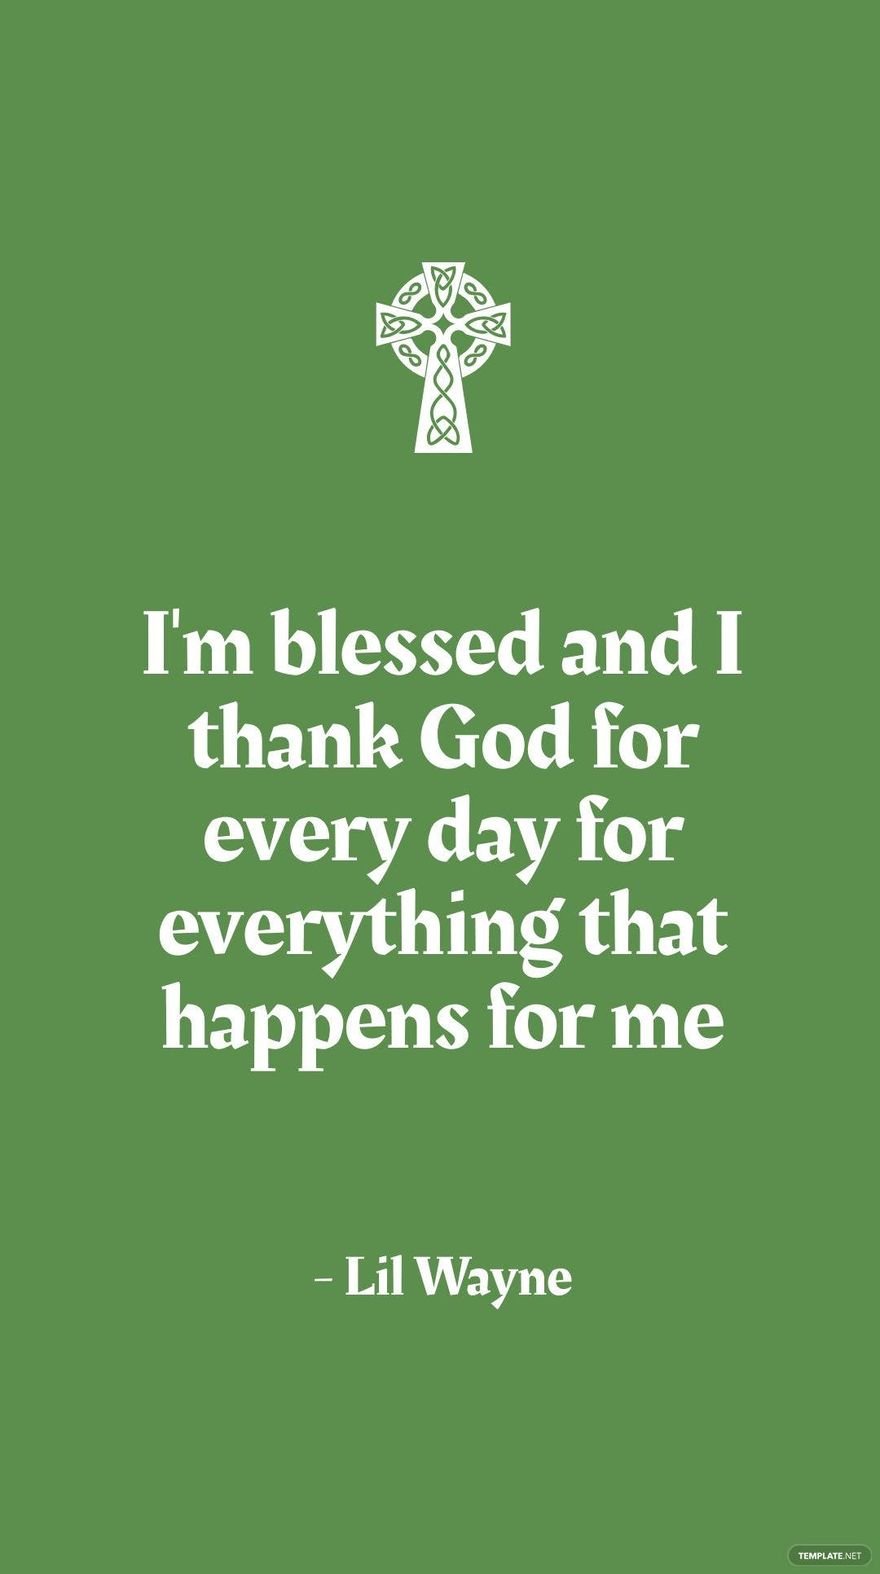 Free Lil Wayne - I'm blessed and I thank God for every day for everything that happens for me in JPG